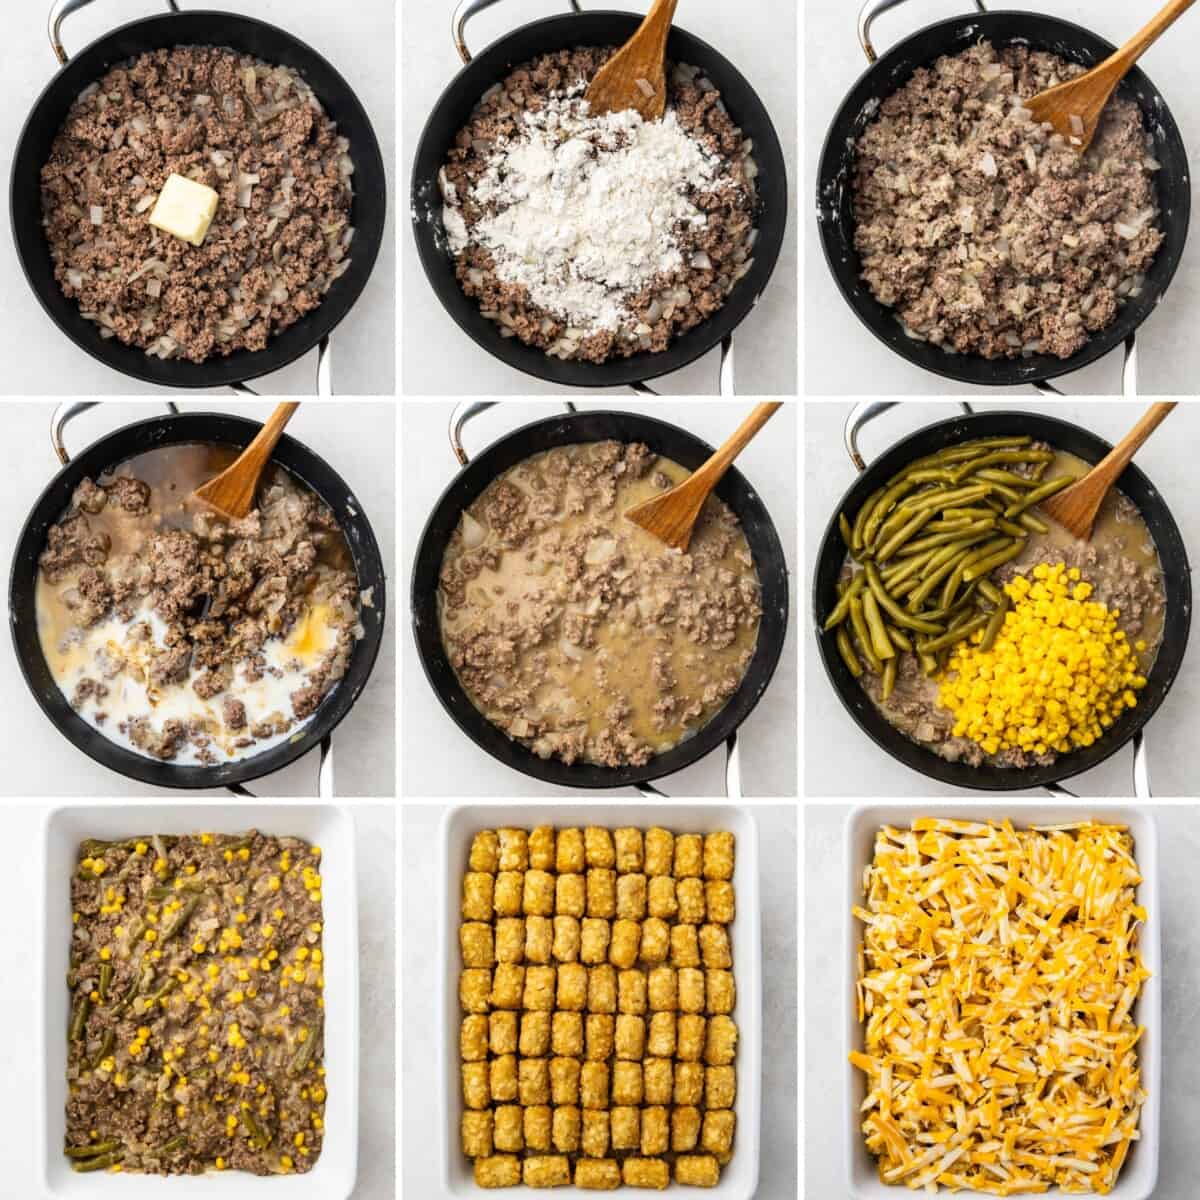 A collage of nine images showing the process of making tater tot casserole from start to finish.